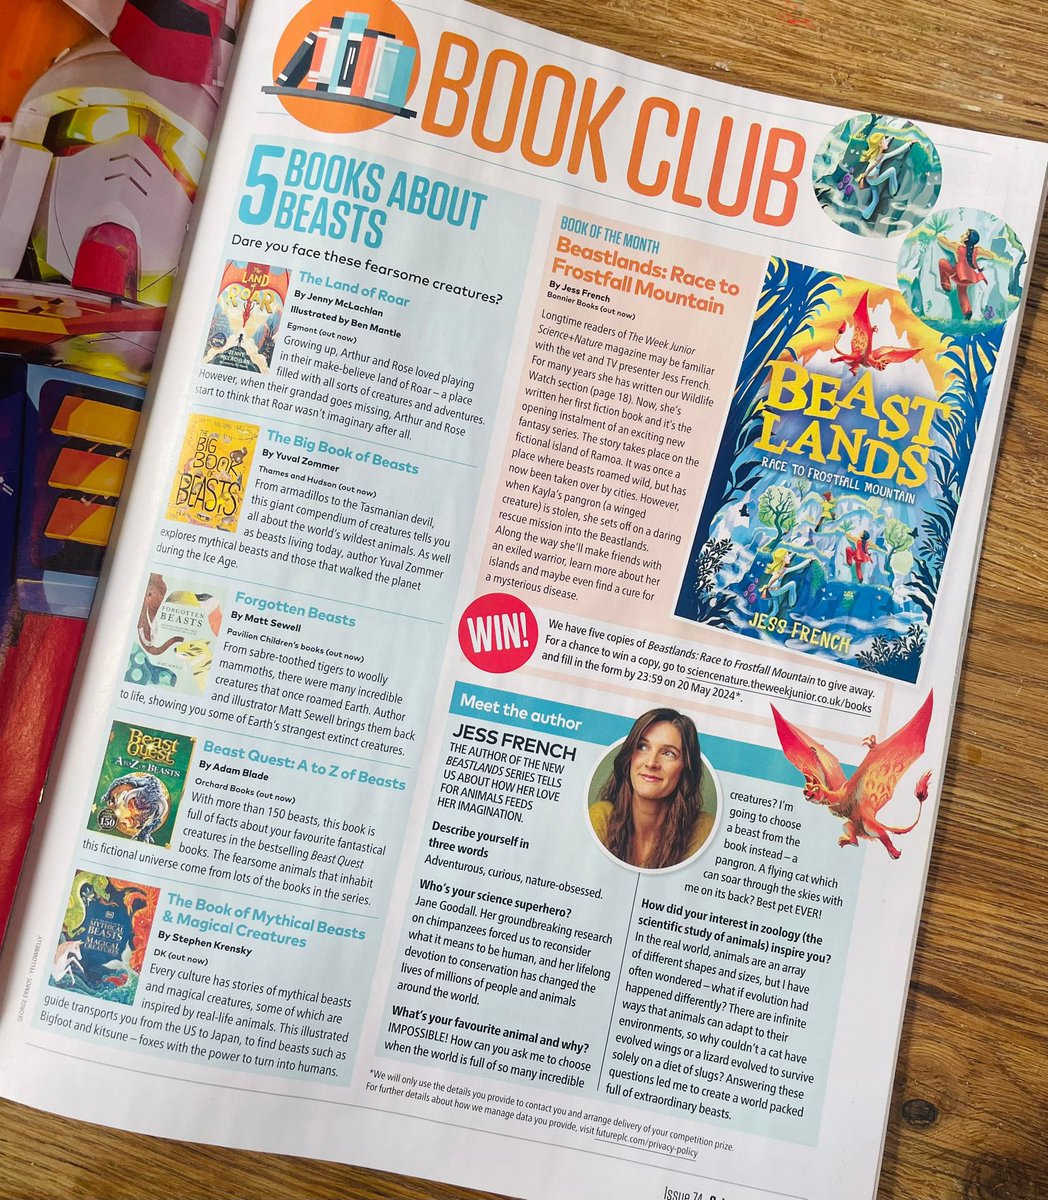 Great to see @Zoologist_Jess and #Beastlands featured as Book of the Month in this month’s @theweekjunior @piccadillypress